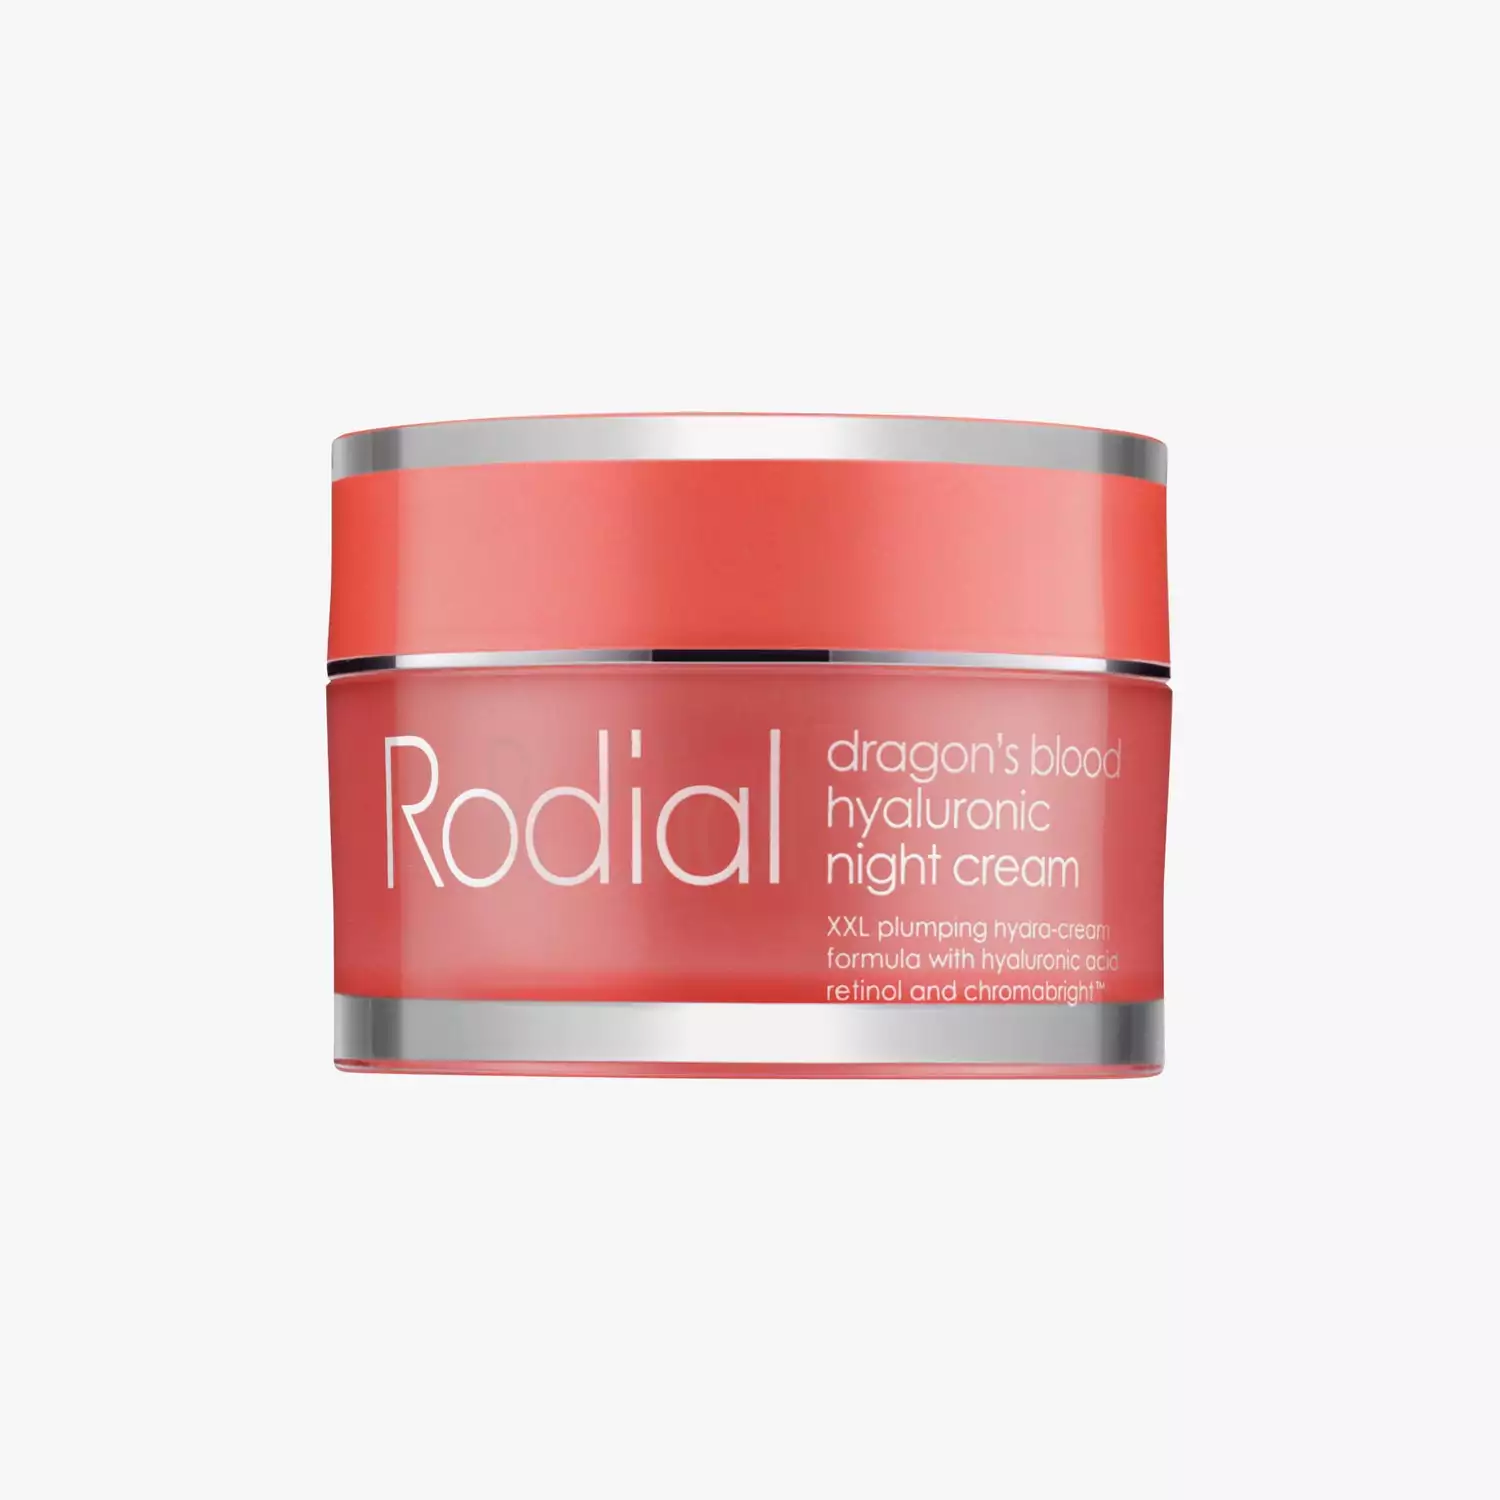 Rodial Dragon’s Blood Hyaluronic Night Cream Discounts and Cashback